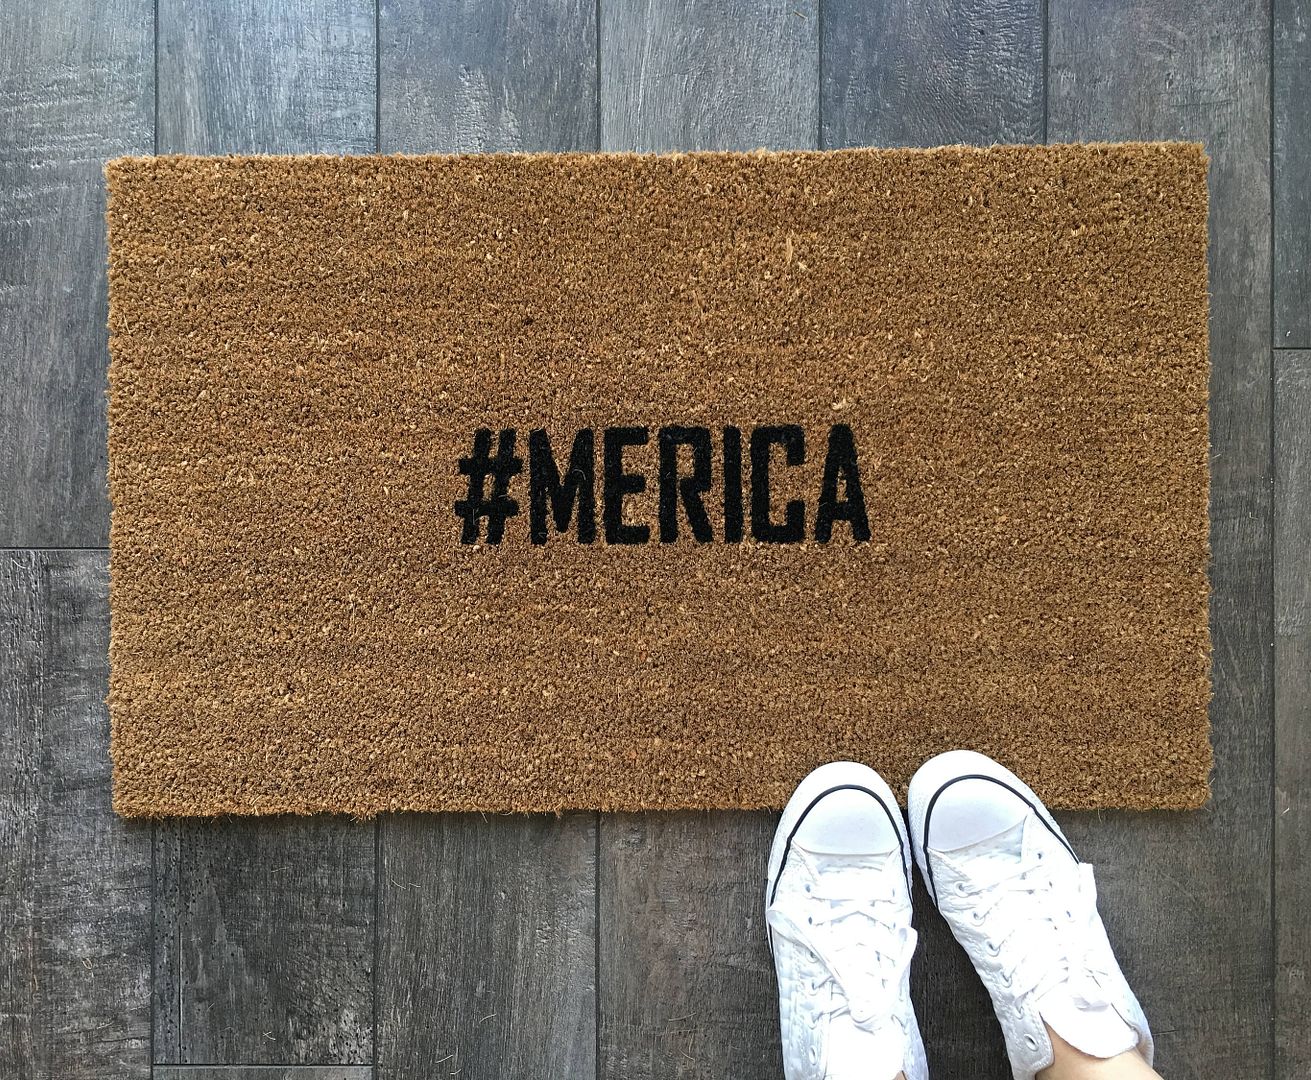 Hashtag-merica doormat: Fun 4th of July party must-haves